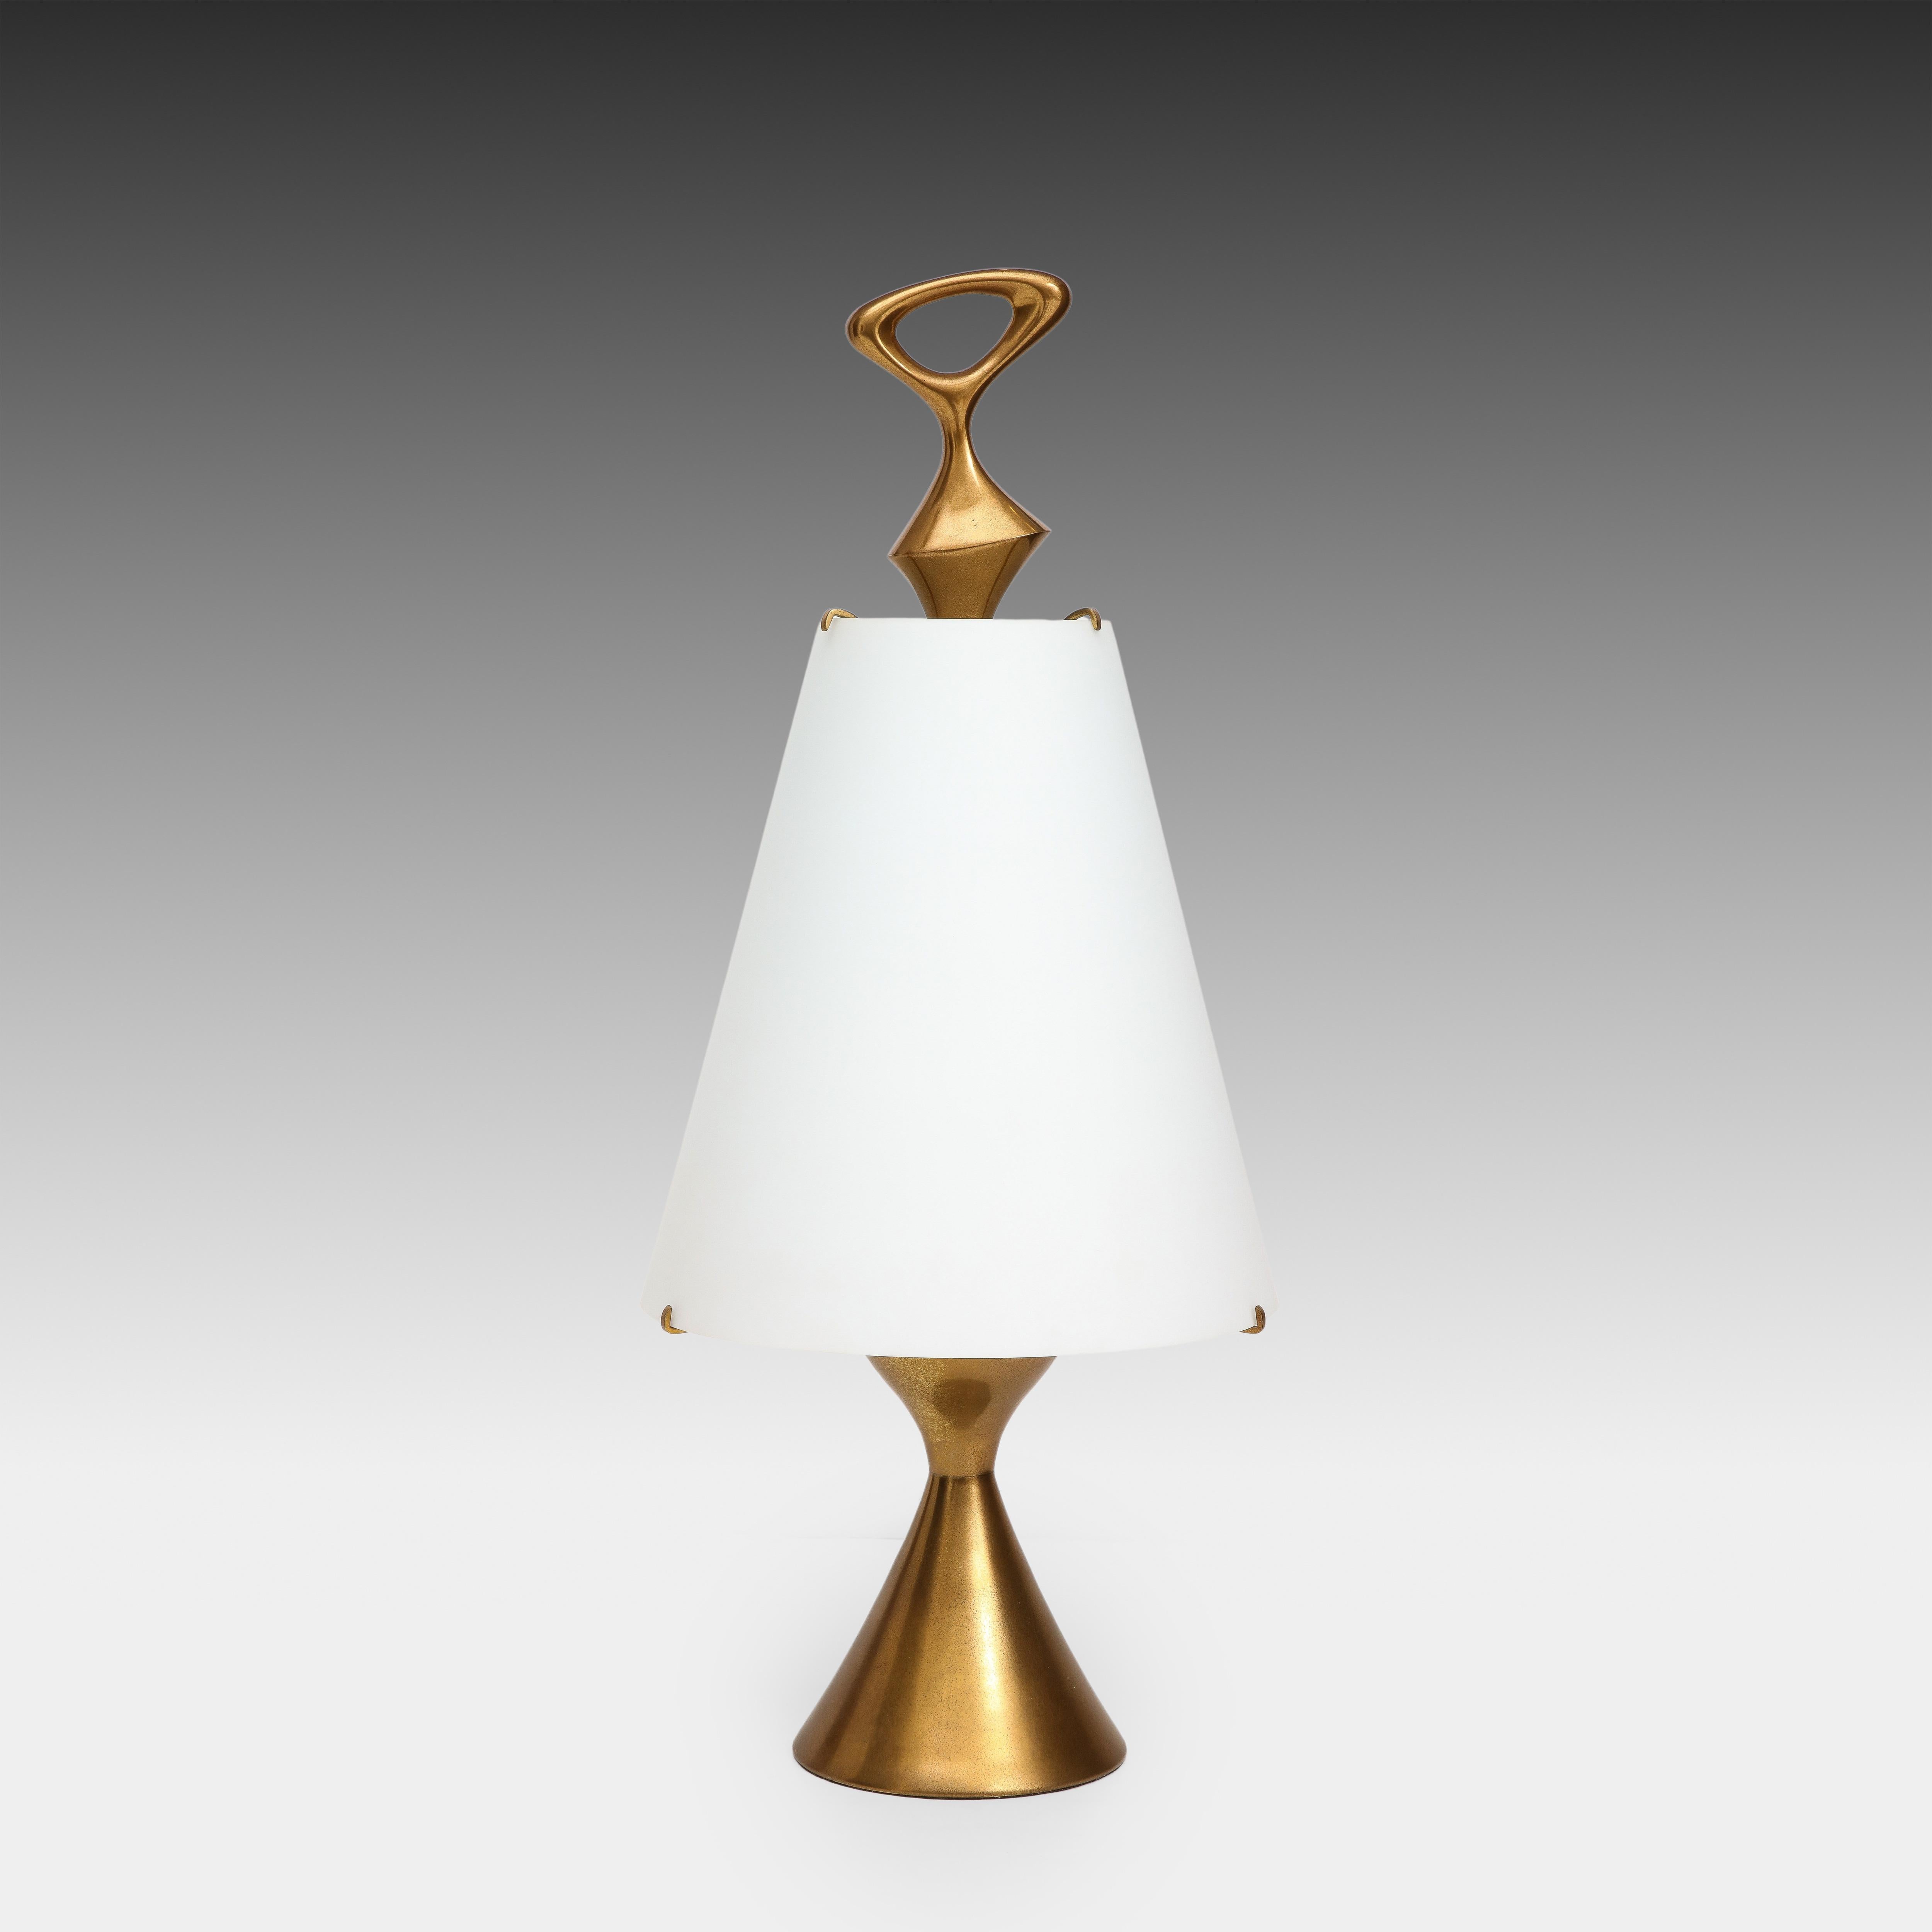 Max Ingrand for Fontana Arte rare exquisite table lamp with sculptural hourglass shaped lacquered gilt brass base and abstract finial with mounted conical opaline glass shade. The contrast between the soft matte white of the opaline glass and the 